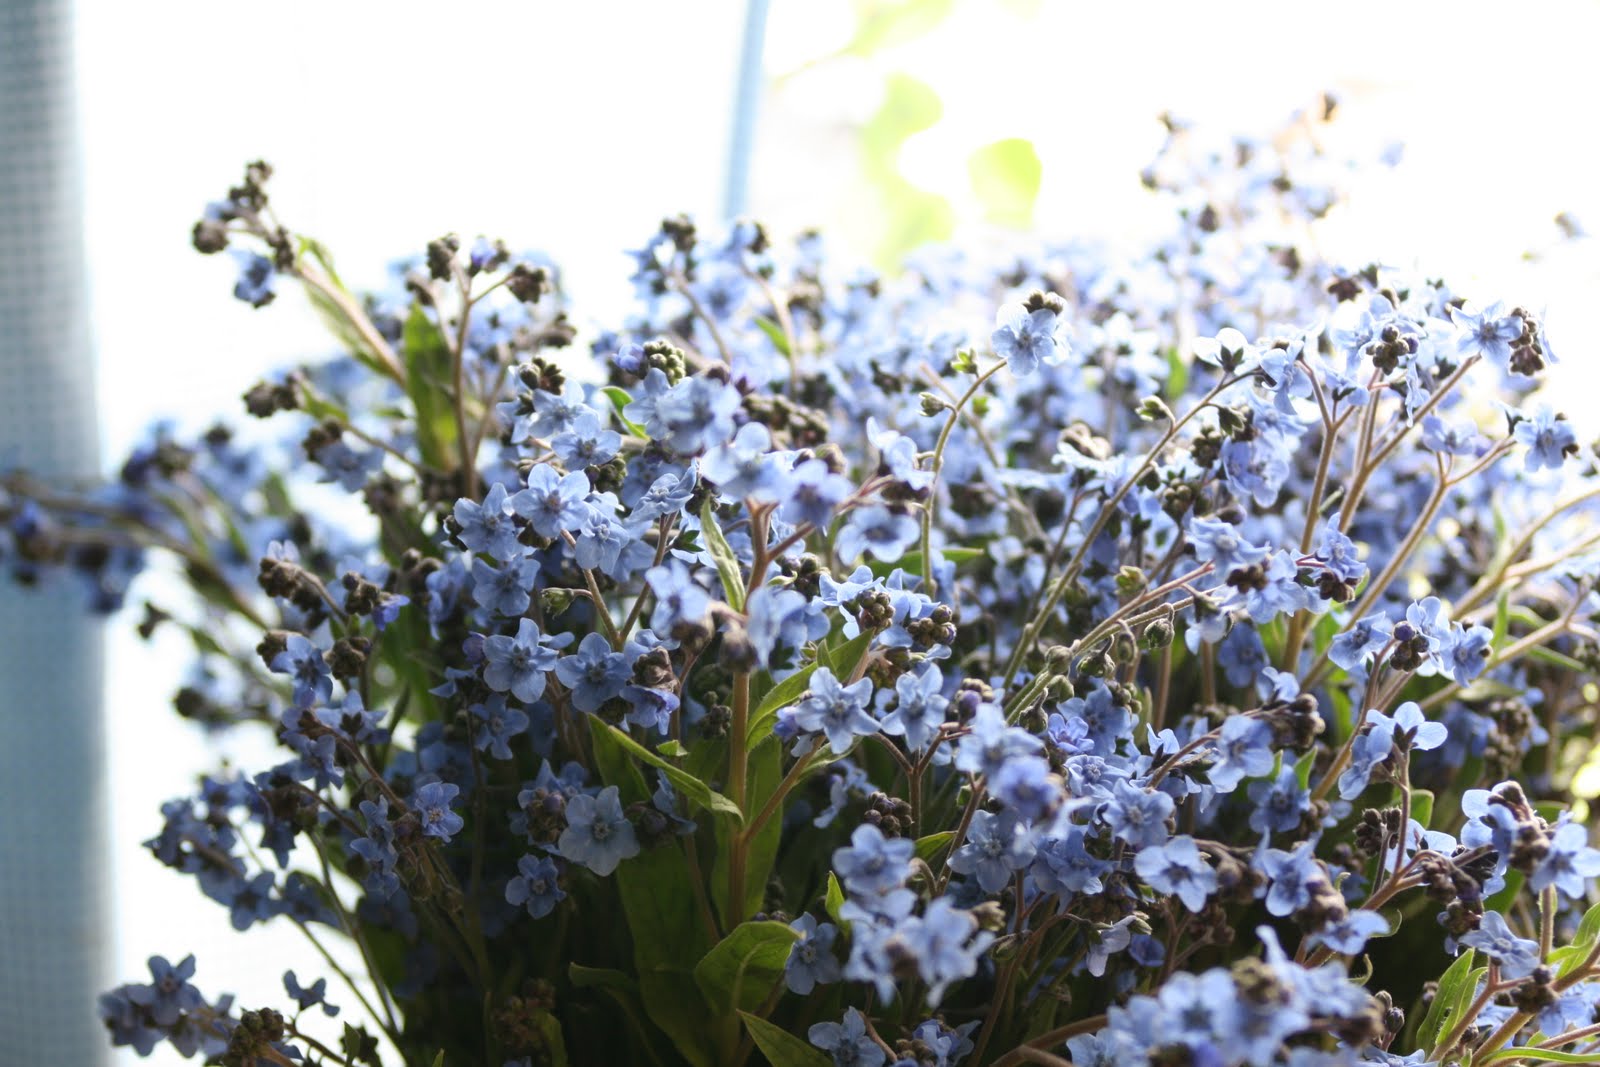 Forget-Me-Not Flowers - How To Grow Forget-Me-Nots